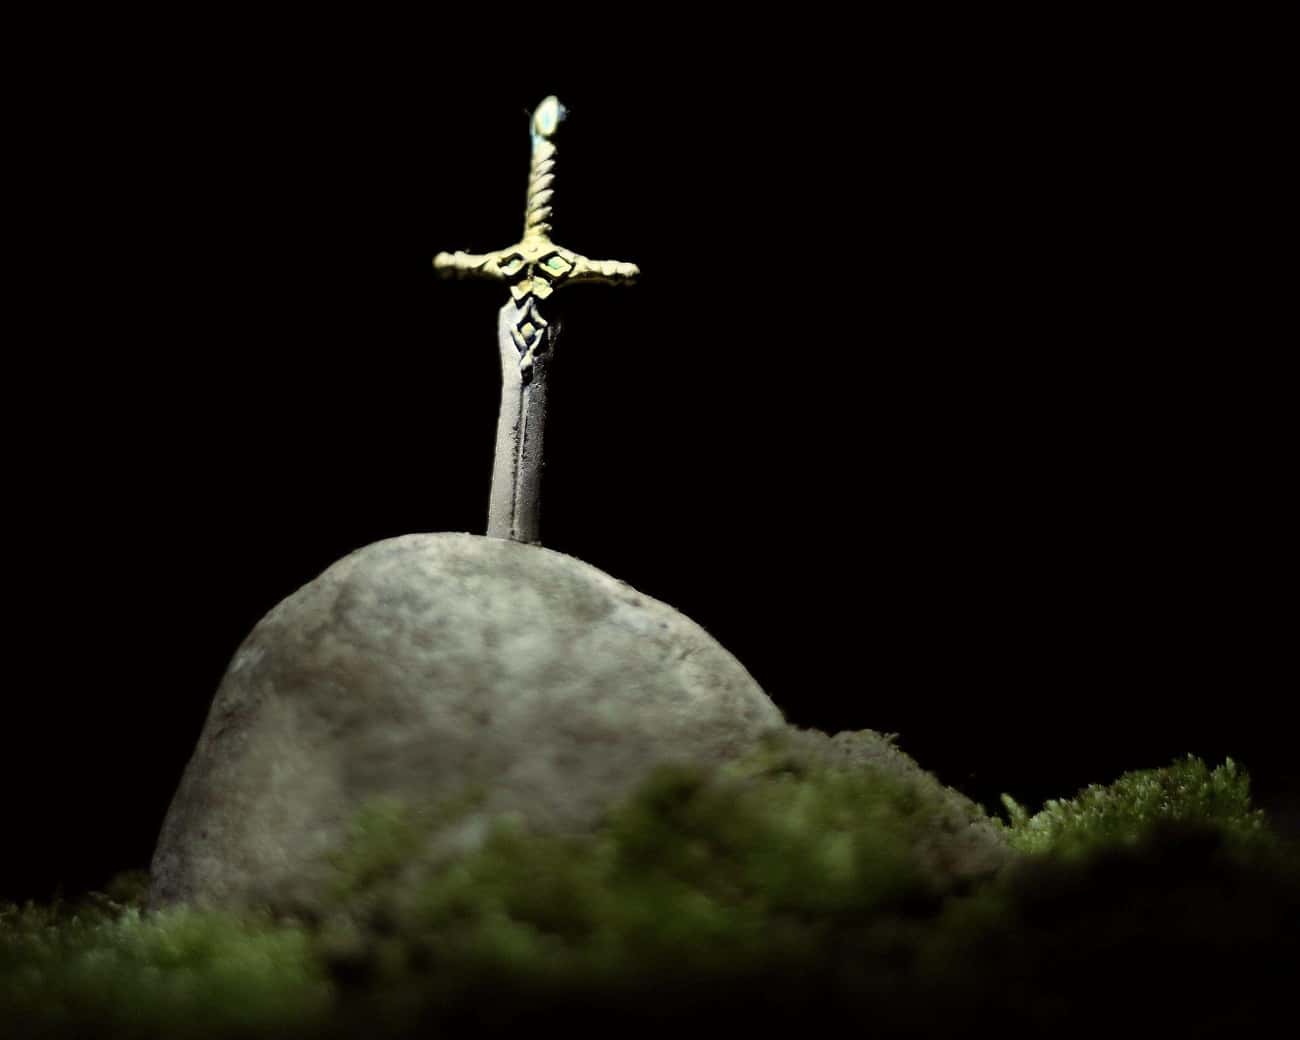 The Sword Is Sometimes Called Excalibur - And Only The Rightful King Of Britain Can Free It From Its Confines